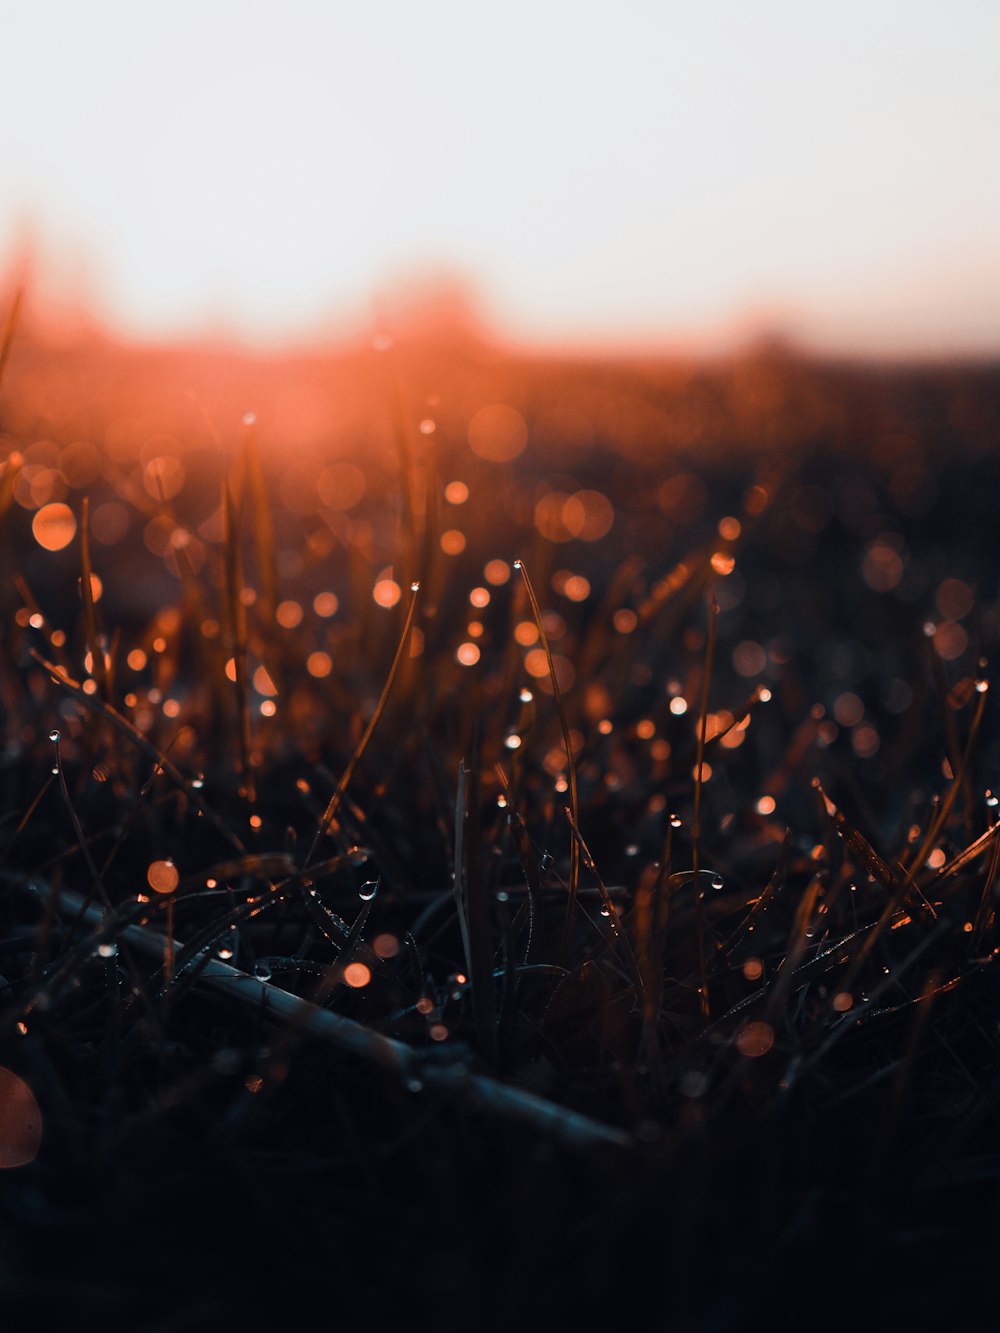 water droplets on grass during sunset